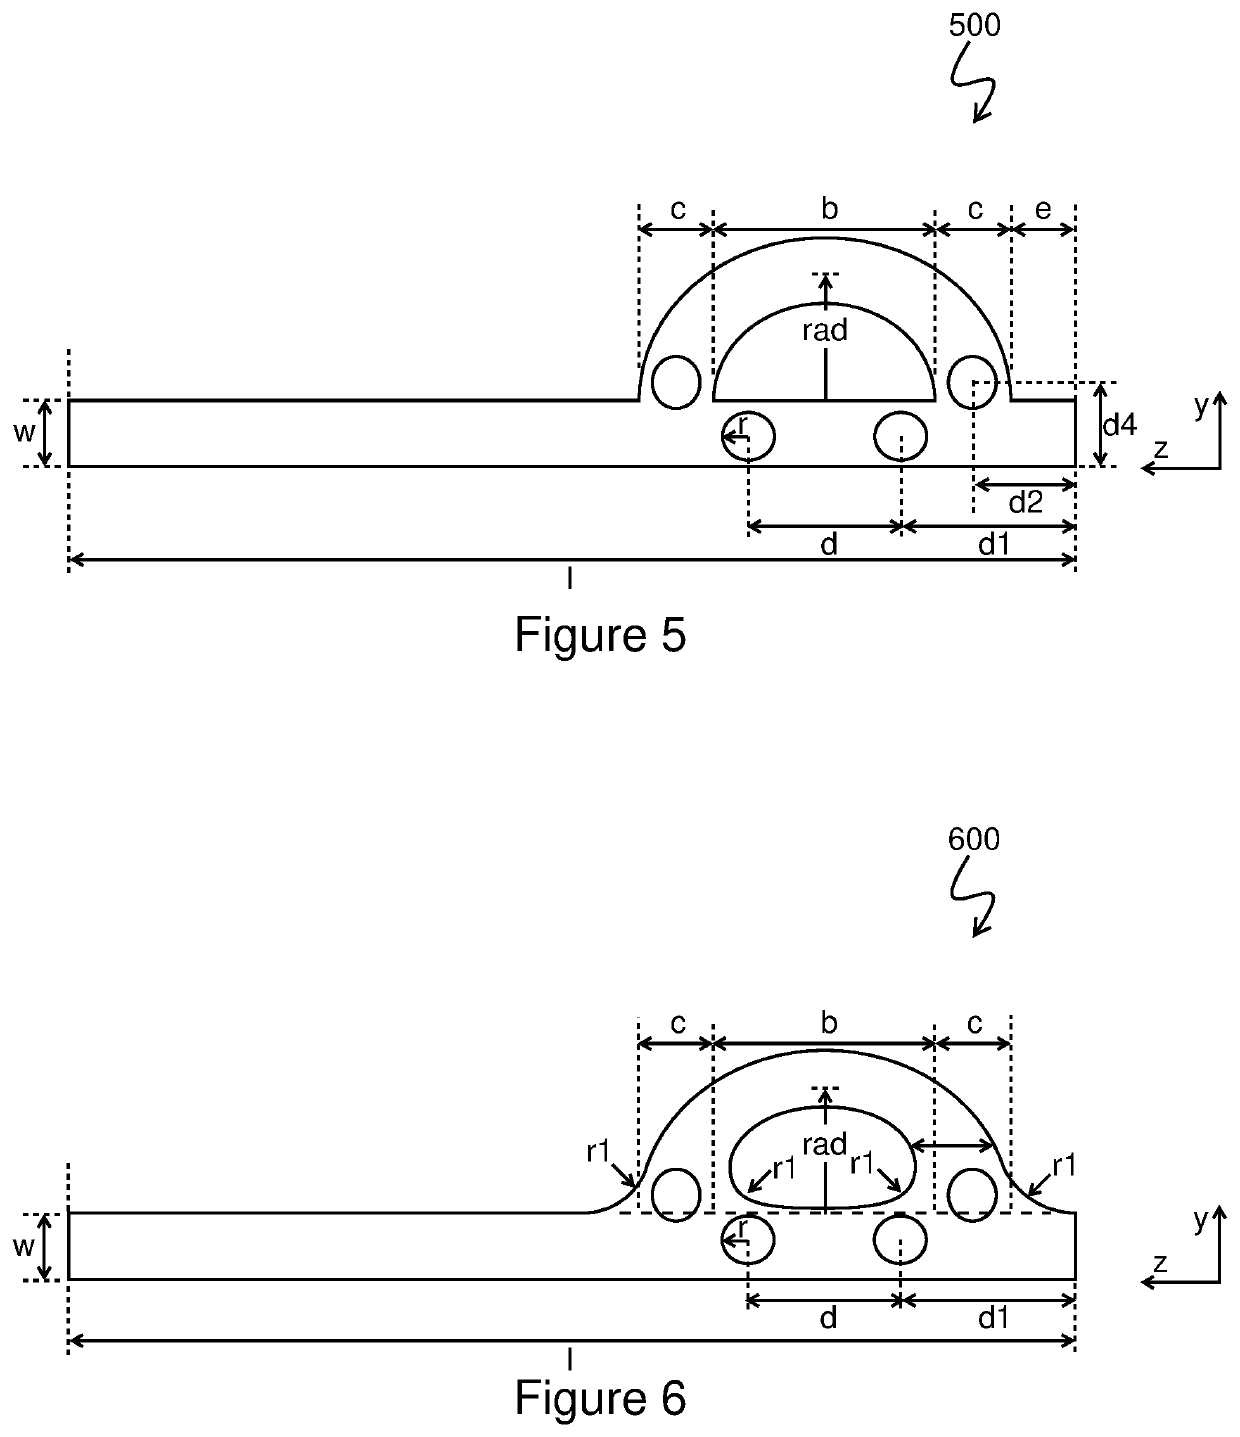 Waveguide phase shifter including a straight waveguide section and a curved waveguide section having vias that can be filled or emptied